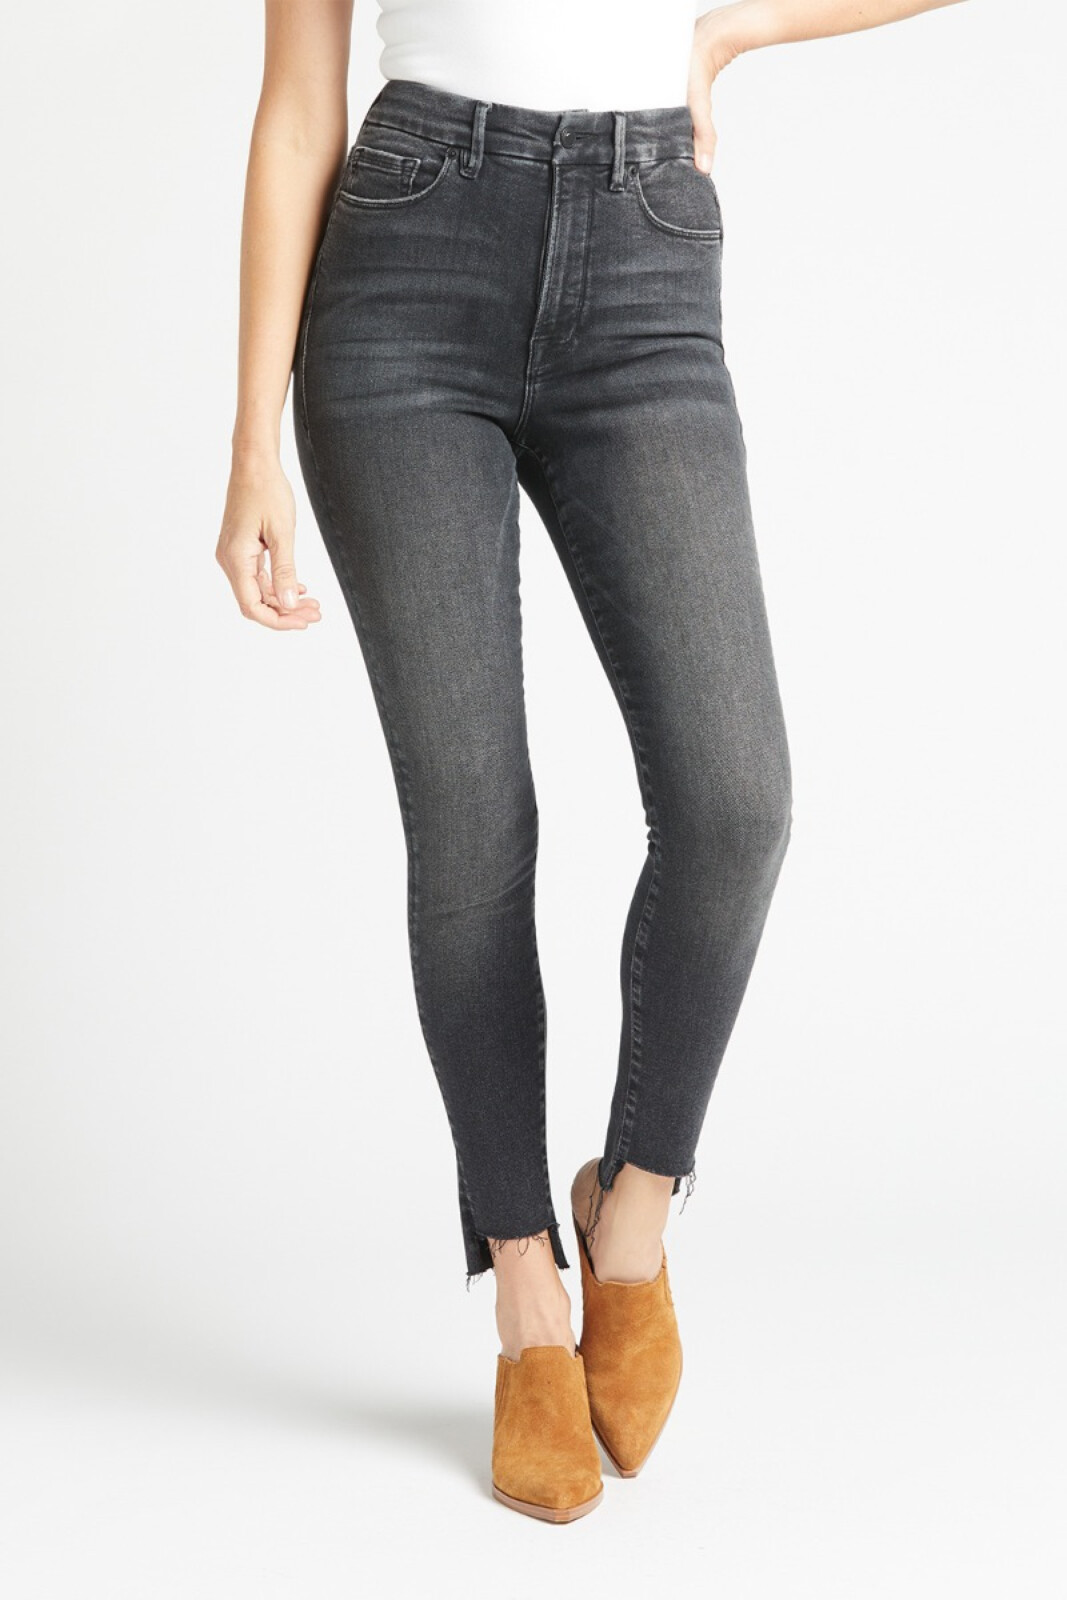 These have just been voted the best butt lift jeans ever!